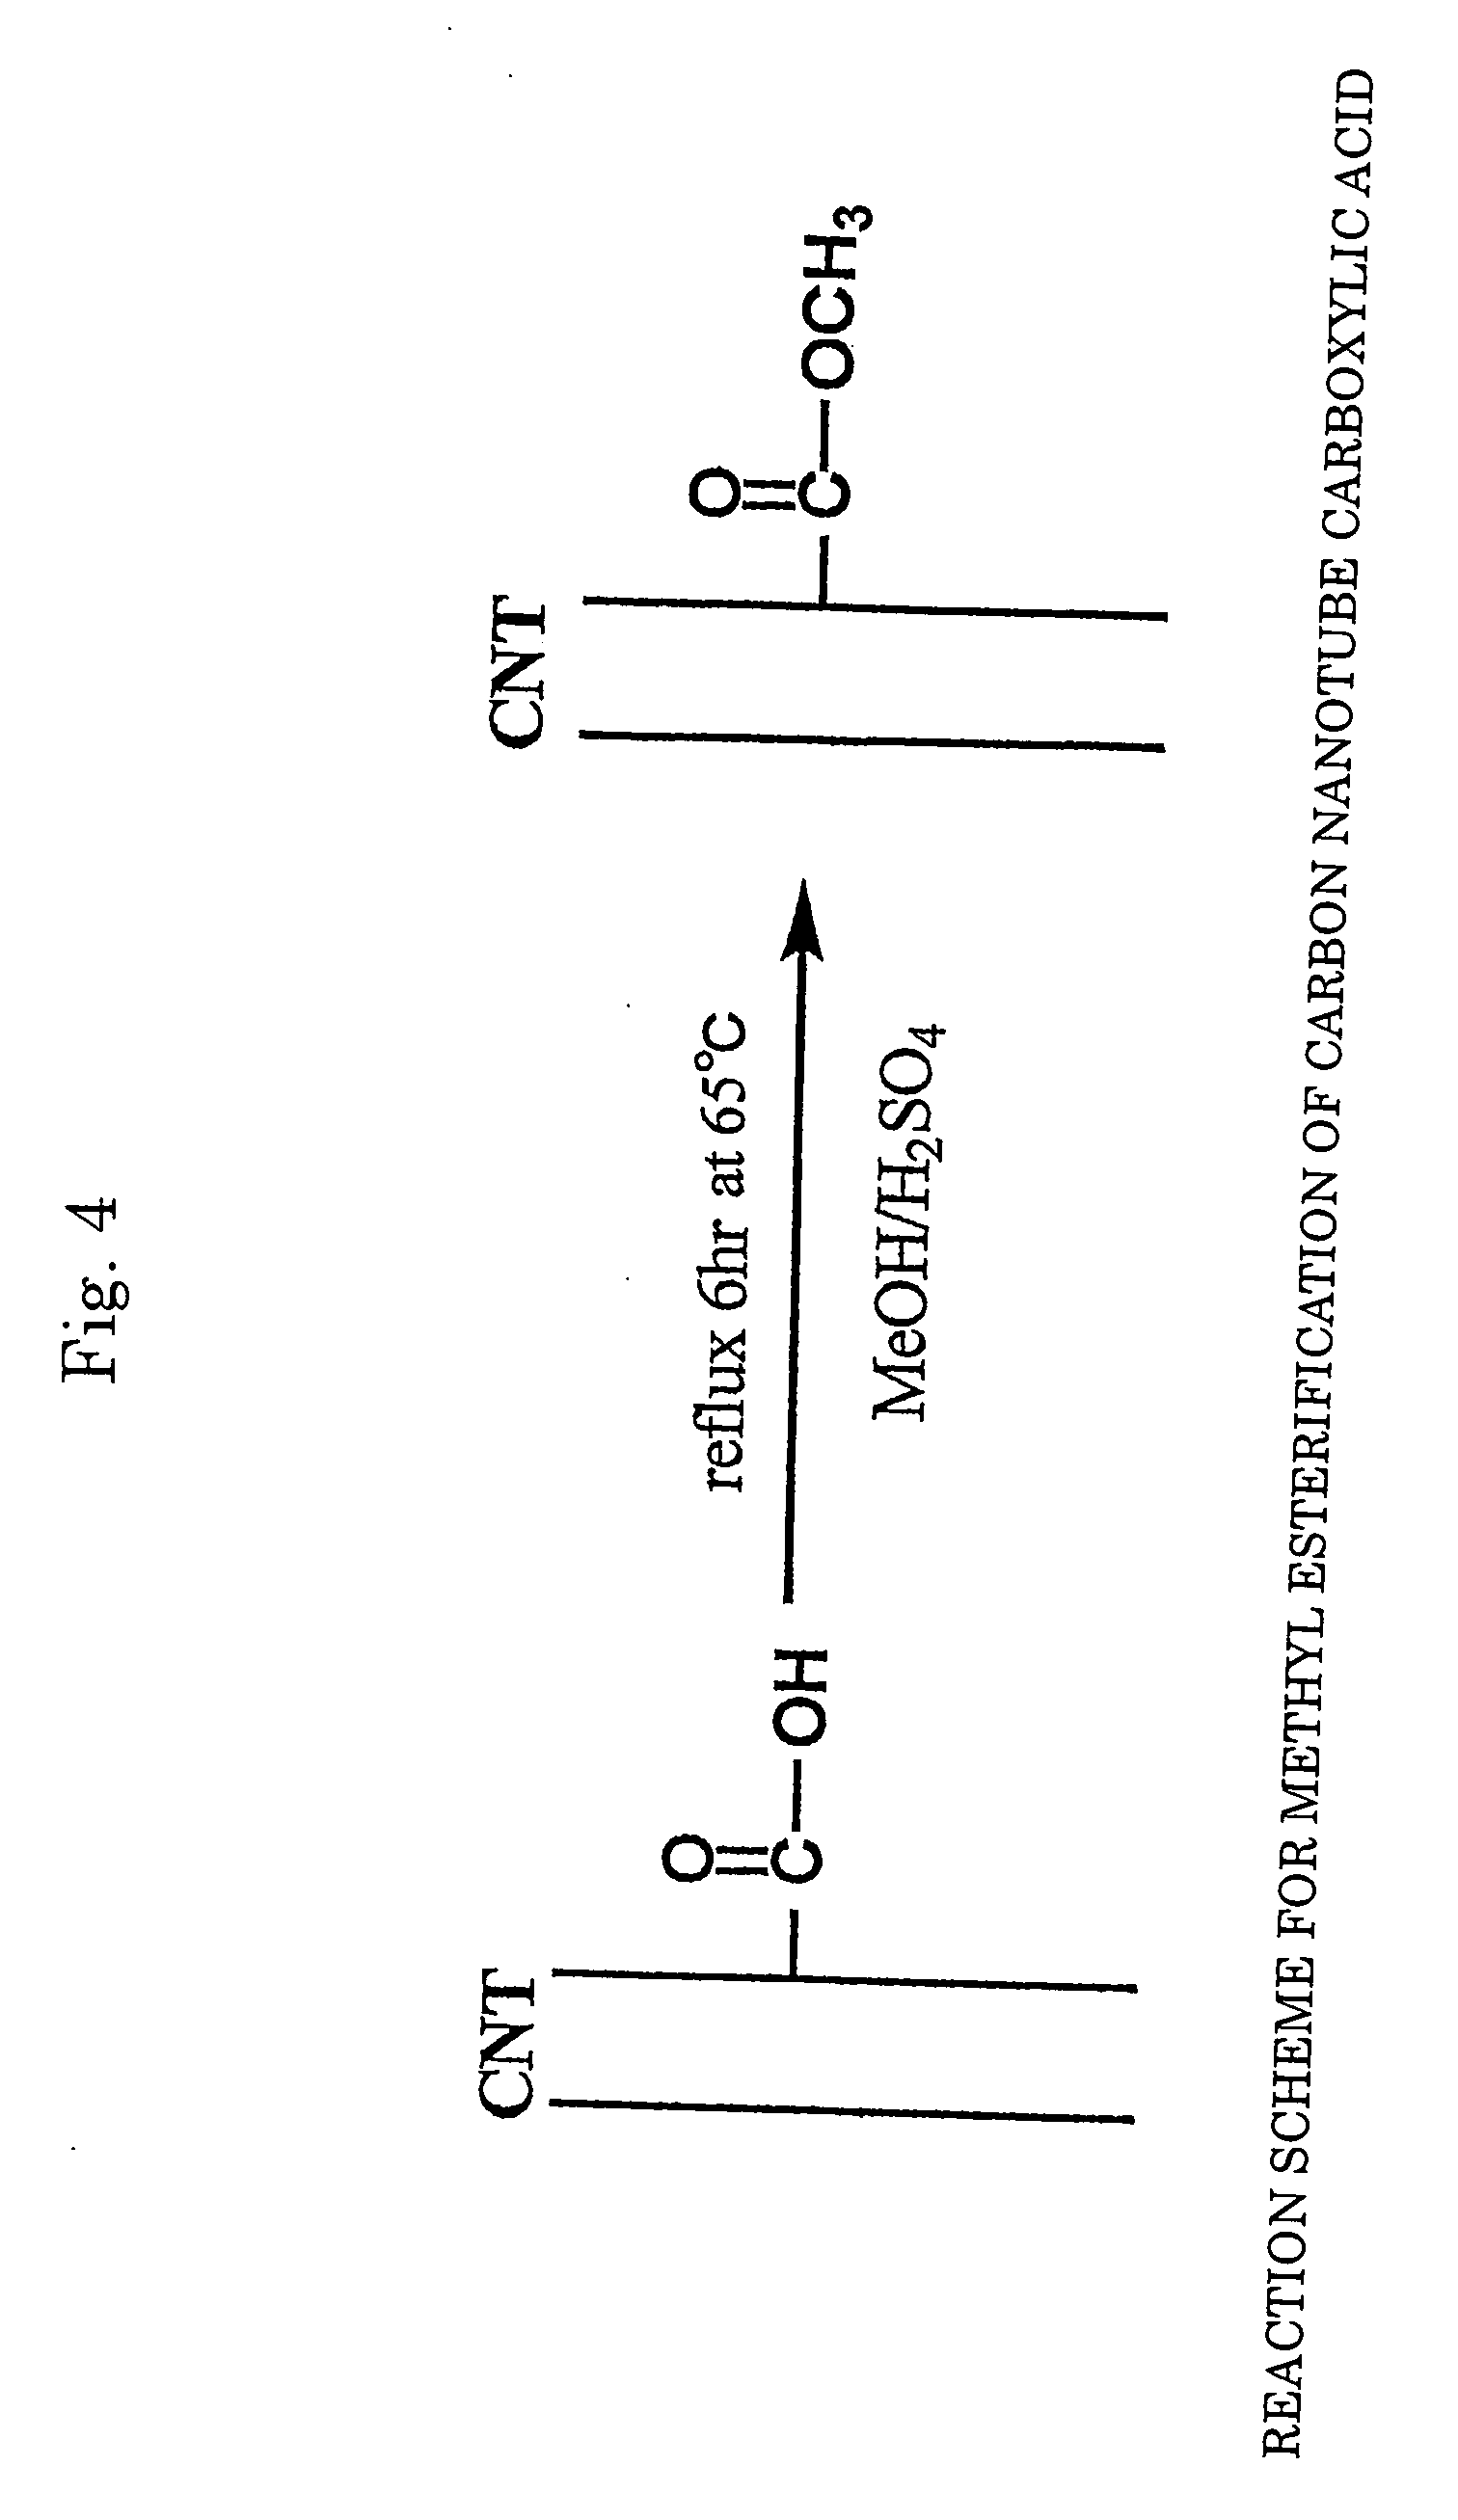 Carbon nanotube composite structure and method of manufacturing the same